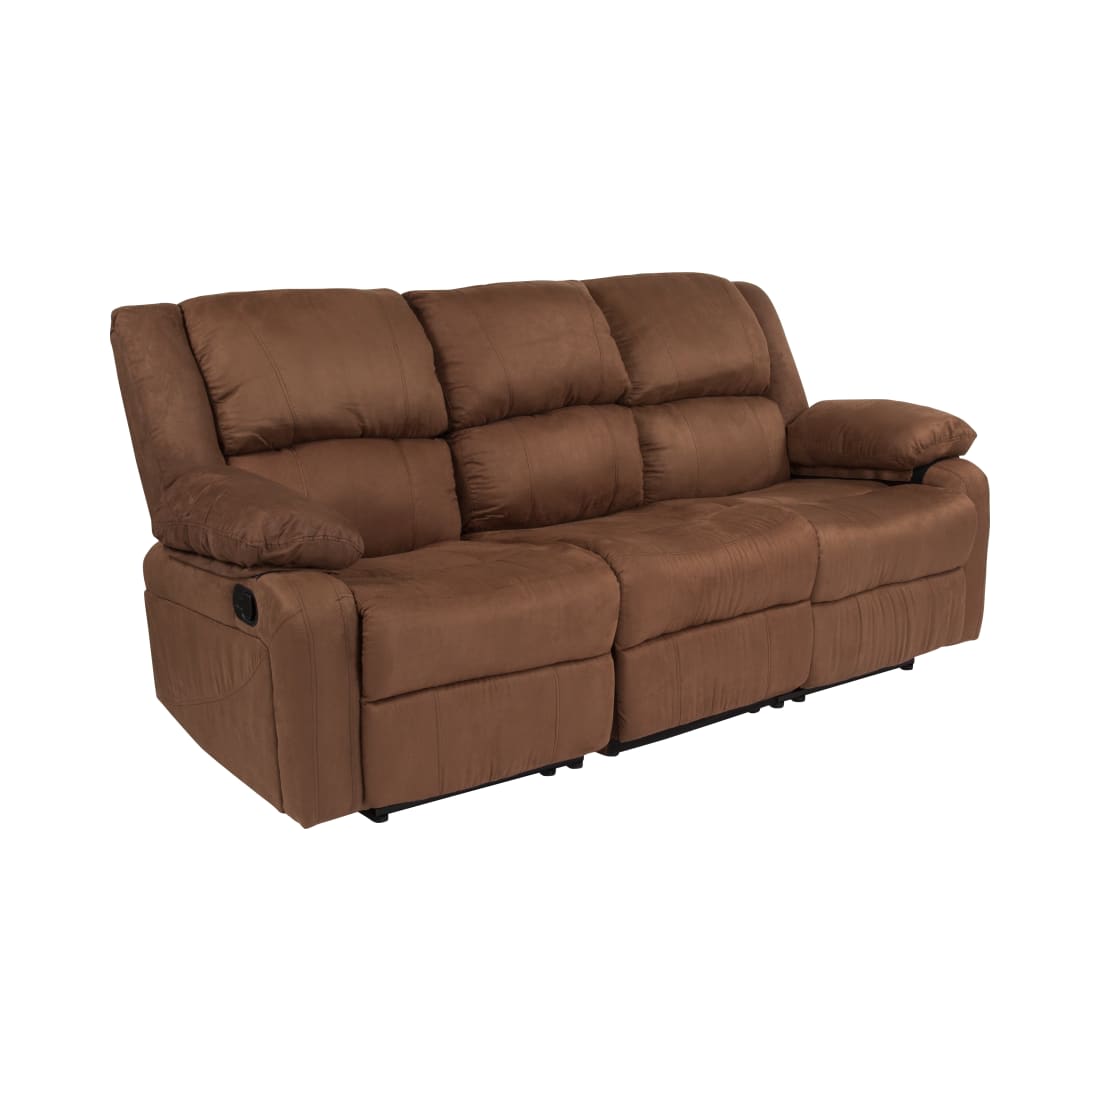 Harmony Series Chocolate Brown Microfiber Sofa with Two Built-In Recliners 